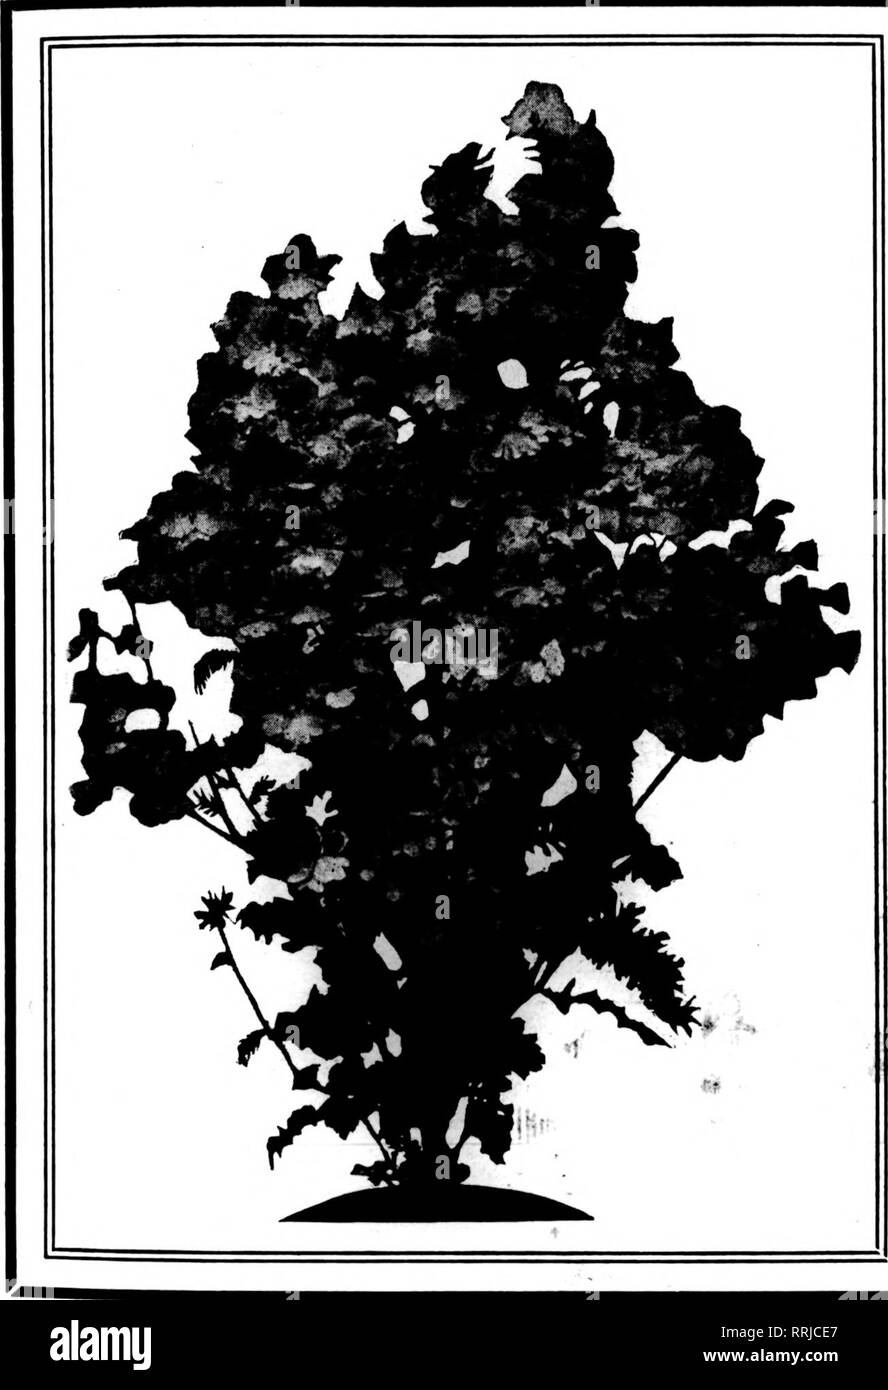 . Florists' review [microform]. Floriculture. NOVBMBEB 28, 1918. The Horists' Review 71. Hurst &amp; Son's Noted Schizanthus WISETONENSIS An excellent strain reselected. Per 100 pkts., $6.00; per doz., $0.85; per oz., $6.00. WISETONENSIS, HYBRIDS, Hunt's Monarch Strain Undoubtedly the finest strain of lar^e flowered hy- brids in existence. Fine compact habit. Per 100 pkts., $7.20; per doz.. $1.00; per oz., $7.20. GRANDIFLORA HYBRIDS, Crimson Shades Deep rose and crimson shades, blotched and marbled chocolate; large flowered. Per 100 pkts., $7.20; per doz., $1.00. GRANDIFLOR HYBRIDS. Rose and  Stock Photo